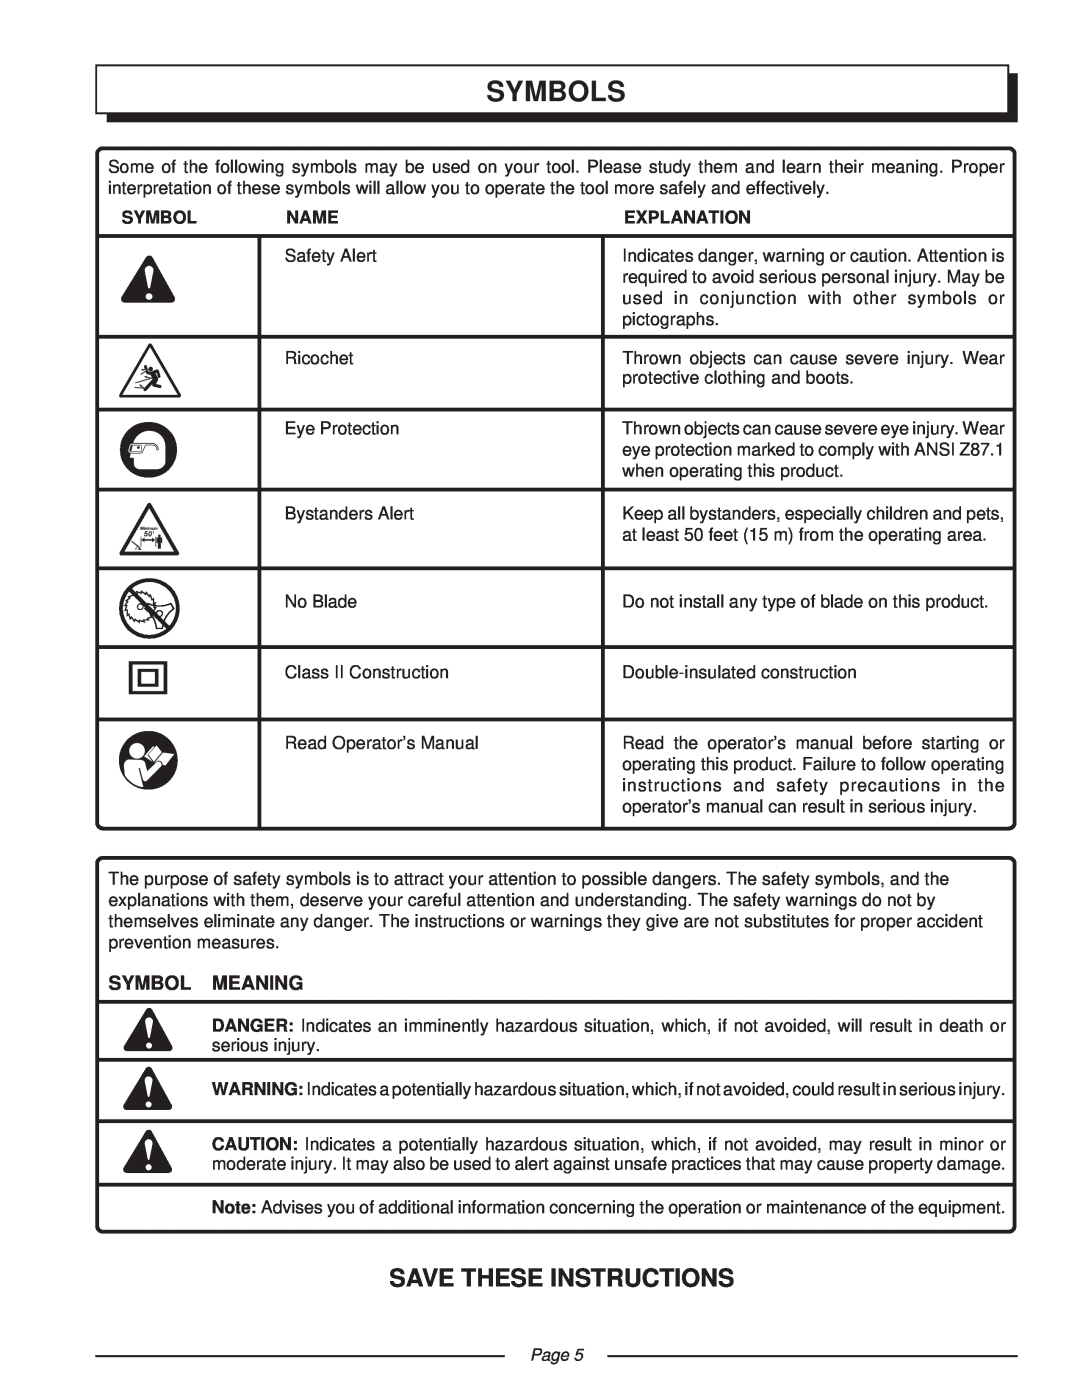 Homelite UT41002 manual Symbols, Save These Instructions, Symbol Meaning, Name, Explanation, Page 